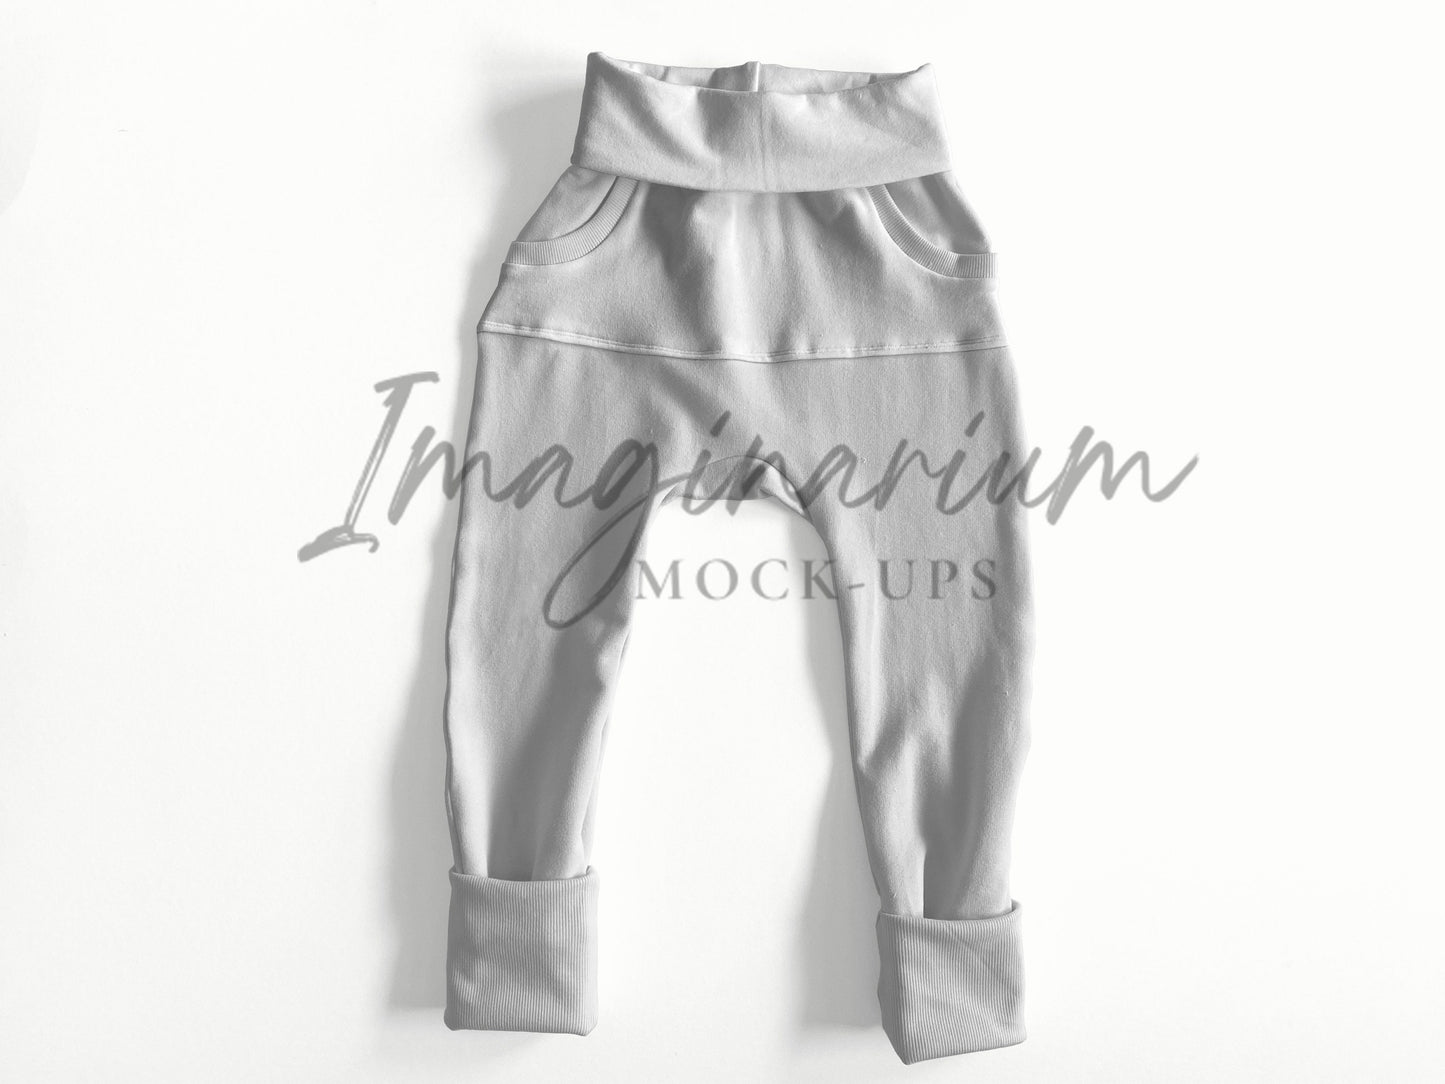 Grow With Me Bunny Bottoms Joggers Mock Up, Realistic Clothing Mockup for Photoshop and Procreate